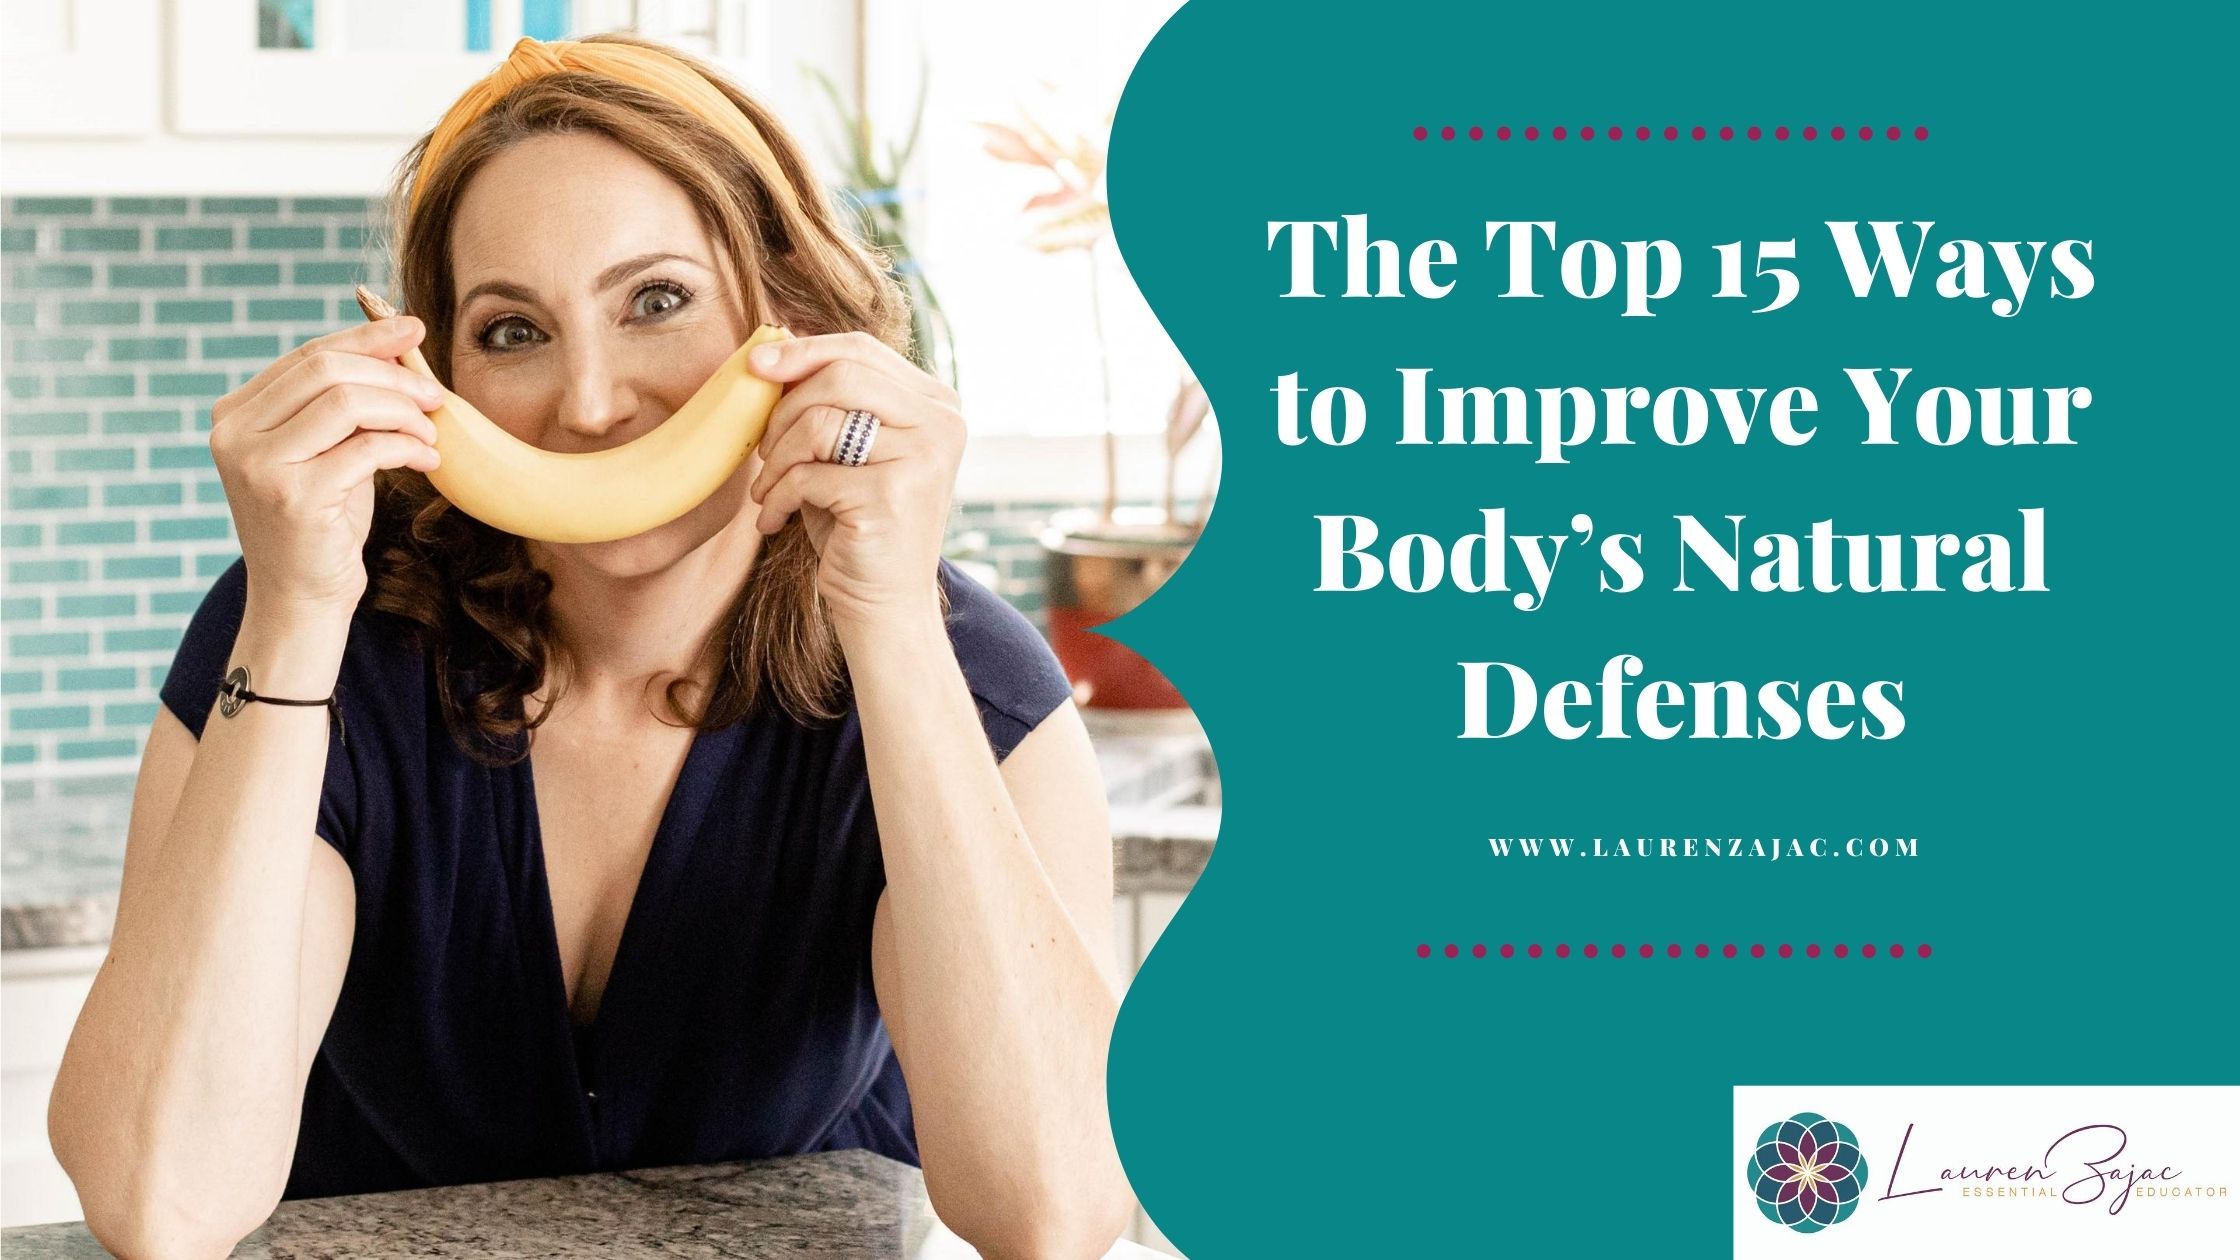 The Top 15 Ways to Improve Your Body's Natural Defenses with Lauren Zajac